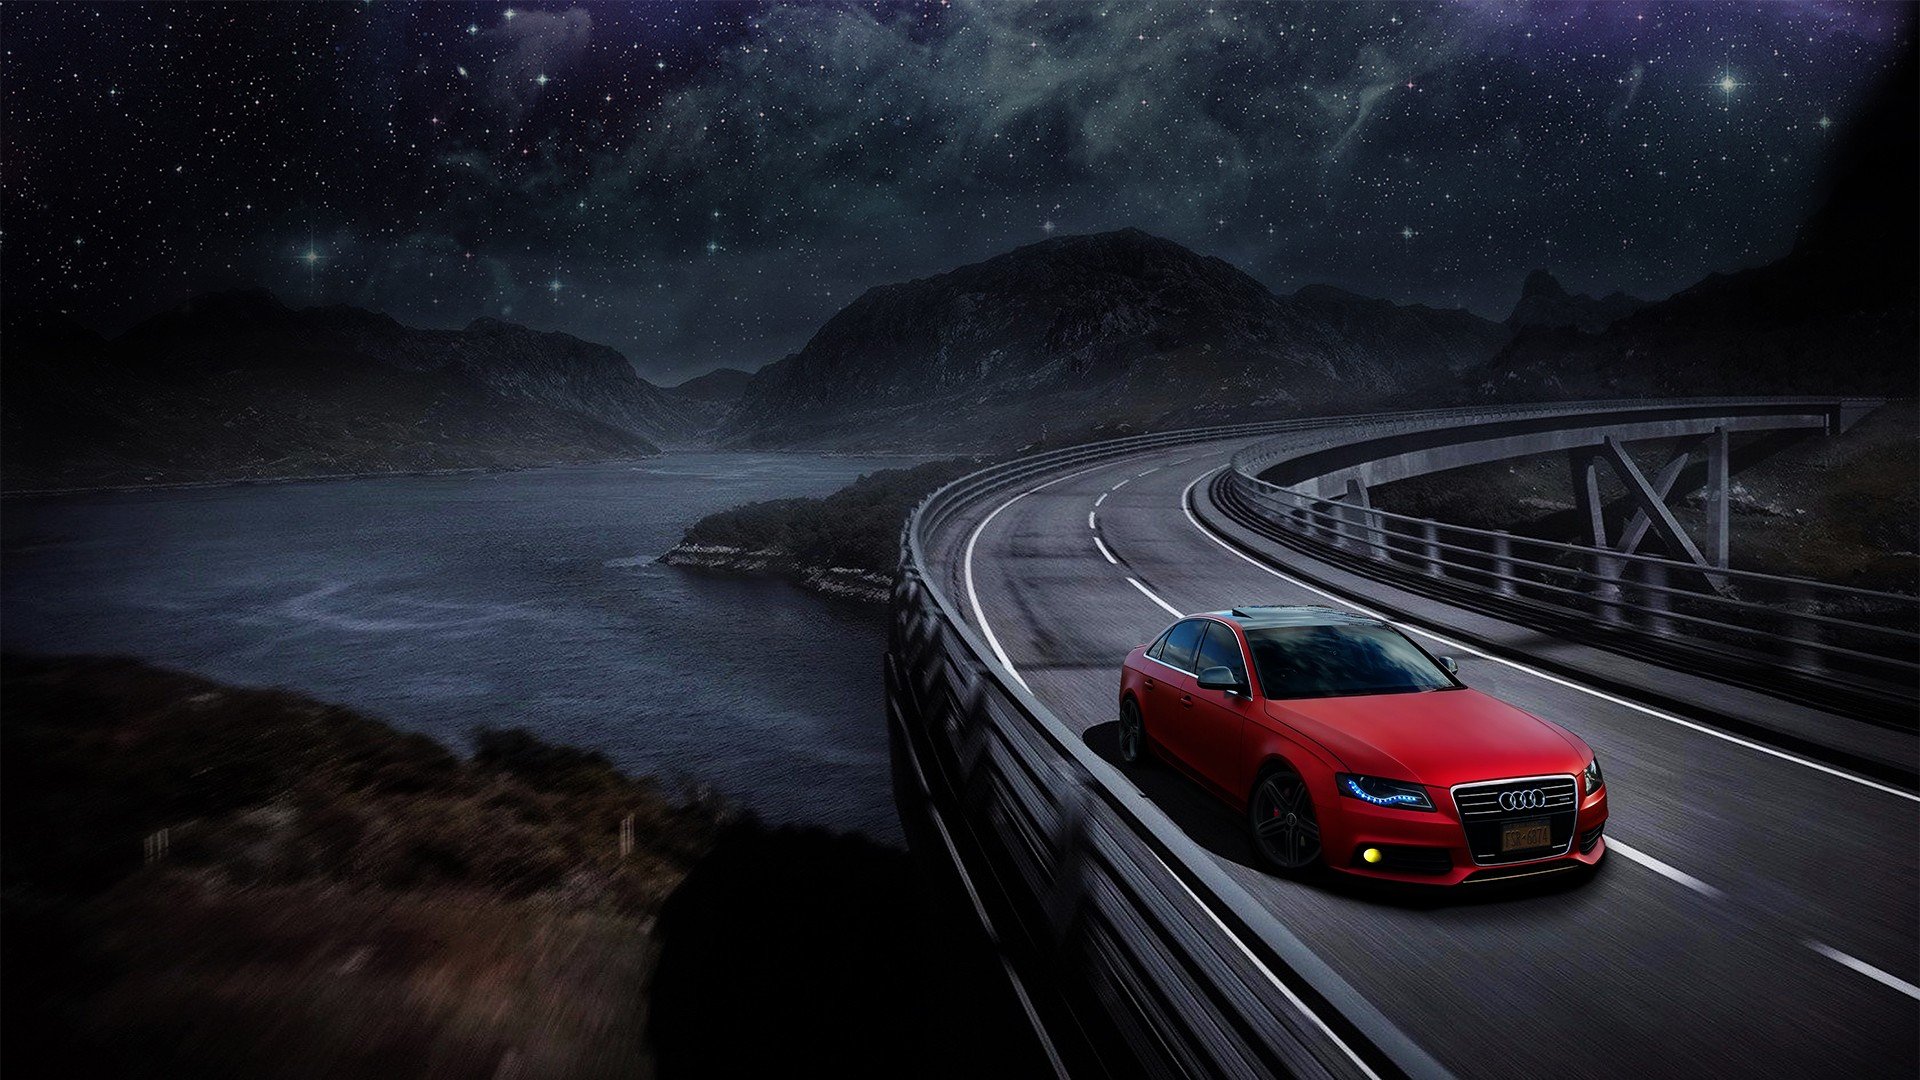 Audi, Audi A4, Audi B8, Red cars, Car, Mountains, Starry night, Road